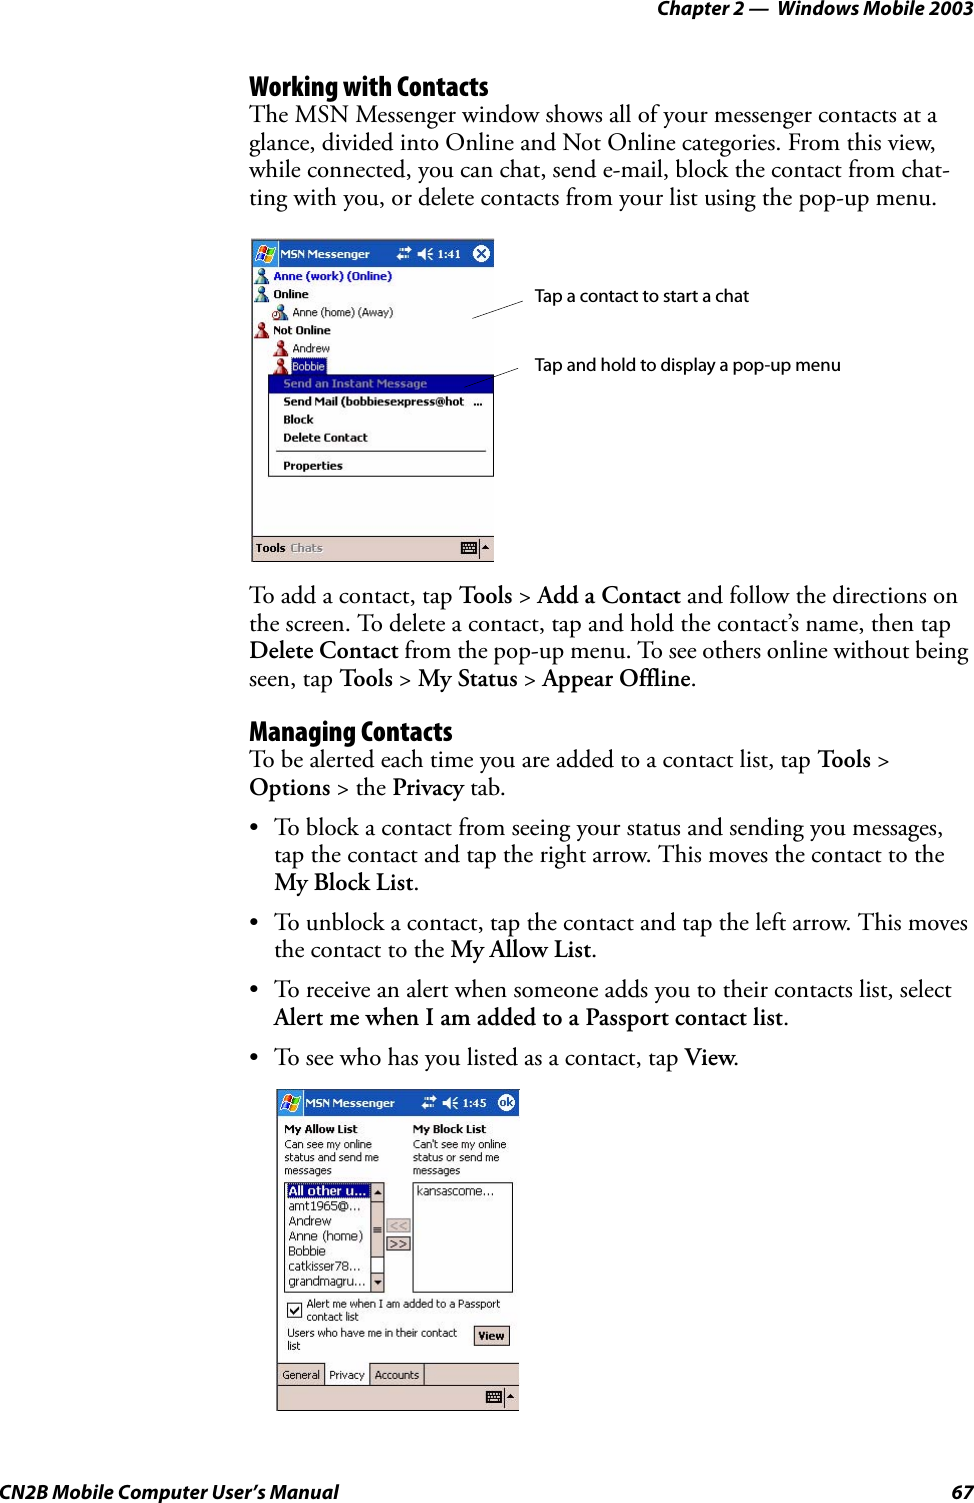 Chapter 2 —  Windows Mobile 2003CN2B Mobile Computer User’s Manual 67Working with ContactsThe MSN Messenger window shows all of your messenger contacts at a glance, divided into Online and Not Online categories. From this view, while connected, you can chat, send e-mail, block the contact from chat-ting with you, or delete contacts from your list using the pop-up menu.To add a contact, tap Tools &gt; Add a Contact and follow the directions on the screen. To delete a contact, tap and hold the contact’s name, then tap Delete Contact from the pop-up menu. To see others online without being seen, tap To o l s  &gt; My Status &gt; Appear Offline. Managing ContactsTo be alerted each time you are added to a contact list, tap To o l s  &gt; Options &gt; the Privacy tab.• To block a contact from seeing your status and sending you messages, tap the contact and tap the right arrow. This moves the contact to the My Block List.• To unblock a contact, tap the contact and tap the left arrow. This moves the contact to the My Allow List.• To receive an alert when someone adds you to their contacts list, select Alert me when I am added to a Passport contact list.• To see who has you listed as a contact, tap View.Tap a contact to start a chatTap and hold to display a pop-up menu